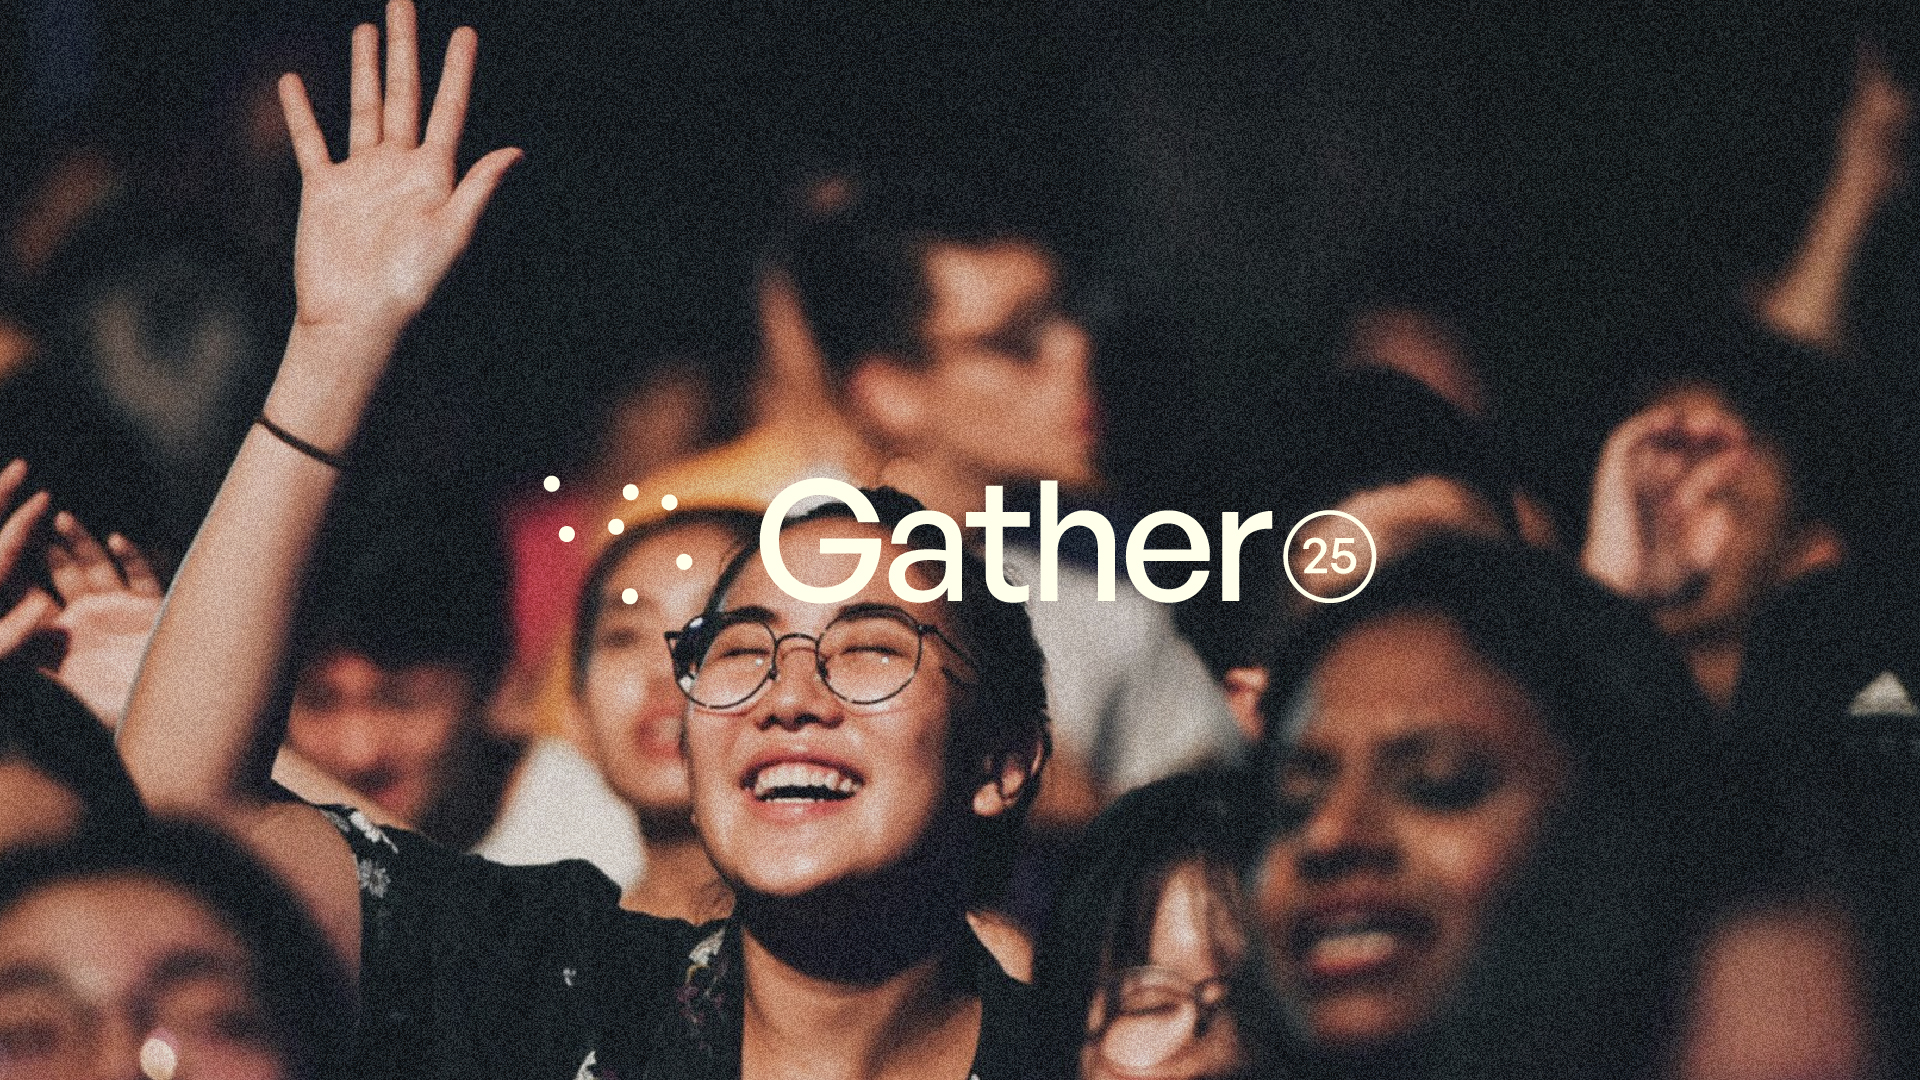 A poster of Gather25